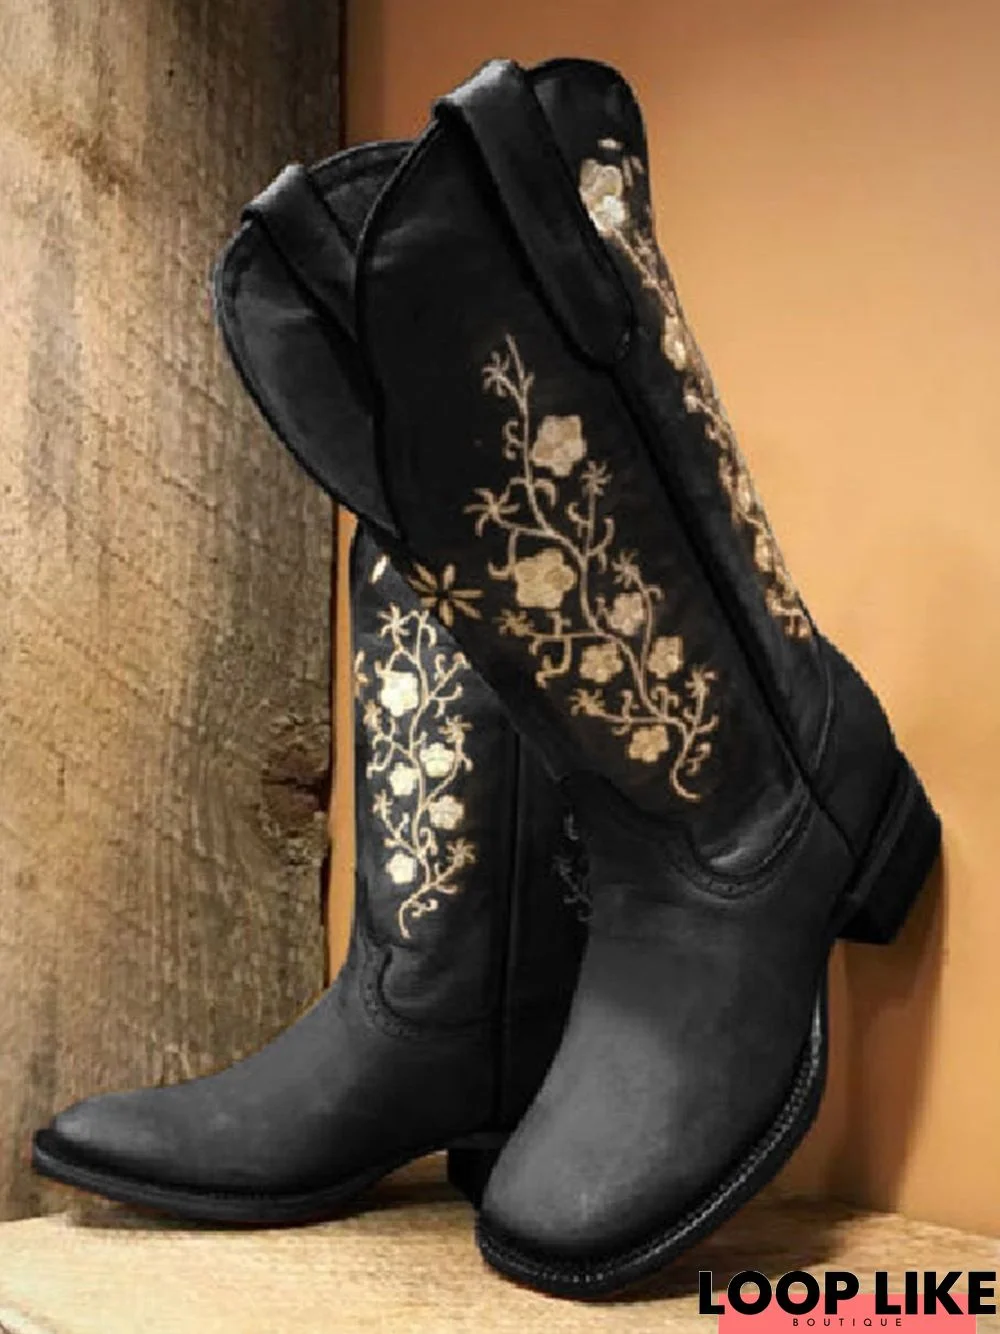 Square Toe Embroidered Western Cowboy Boots Chunky Heel Boots